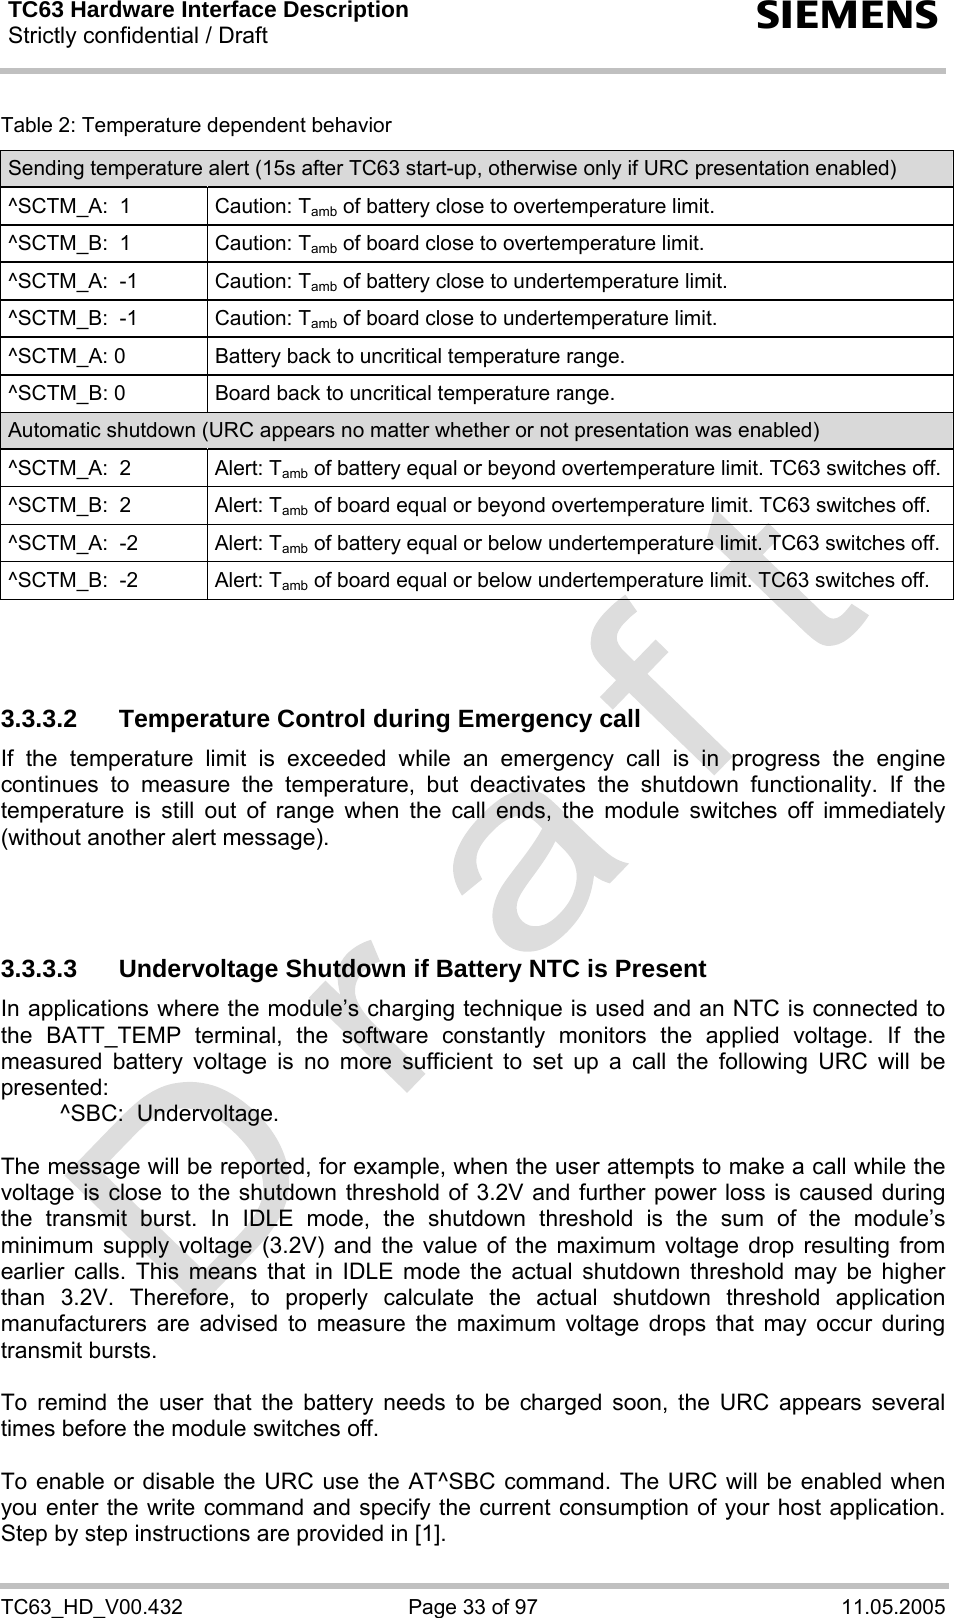 TC63 Hardware Interface Description Strictly confidential / Draft  s TC63_HD_V00.432  Page 33 of 97  11.05.2005 Table 2: Temperature dependent behavior Sending temperature alert (15s after TC63 start-up, otherwise only if URC presentation enabled) ^SCTM_A:  1  Caution: Tamb of battery close to overtemperature limit. ^SCTM_B:  1  Caution: Tamb of board close to overtemperature limit. ^SCTM_A:  -1  Caution: Tamb of battery close to undertemperature limit. ^SCTM_B:  -1  Caution: Tamb of board close to undertemperature limit. ^SCTM_A: 0  Battery back to uncritical temperature range. ^SCTM_B: 0  Board back to uncritical temperature range. Automatic shutdown (URC appears no matter whether or not presentation was enabled) ^SCTM_A:  2  Alert: Tamb of battery equal or beyond overtemperature limit. TC63 switches off.^SCTM_B:  2  Alert: Tamb of board equal or beyond overtemperature limit. TC63 switches off. ^SCTM_A:  -2  Alert: Tamb of battery equal or below undertemperature limit. TC63 switches off. ^SCTM_B:  -2  Alert: Tamb of board equal or below undertemperature limit. TC63 switches off.    3.3.3.2  Temperature Control during Emergency call If the temperature limit is exceeded while an emergency call is in progress the engine continues to measure the temperature, but deactivates the shutdown functionality. If the temperature is still out of range when the call ends, the module switches off immediately (without another alert message).    3.3.3.3  Undervoltage Shutdown if Battery NTC is Present In applications where the module’s charging technique is used and an NTC is connected to the BATT_TEMP terminal, the software constantly monitors the applied voltage. If the measured battery voltage is no more sufficient to set up a call the following URC will be presented:    ^SBC:  Undervoltage.  The message will be reported, for example, when the user attempts to make a call while the voltage is close to the shutdown threshold of 3.2V and further power loss is caused during the transmit burst. In IDLE mode, the shutdown threshold is the sum of the module’s minimum supply voltage (3.2V) and the value of the maximum voltage drop resulting from earlier calls. This means that in IDLE mode the actual shutdown threshold may be higher than 3.2V. Therefore, to properly calculate the actual shutdown threshold application manufacturers are advised to measure the maximum voltage drops that may occur during transmit bursts.   To remind the user that the battery needs to be charged soon, the URC appears several times before the module switches off.   To enable or disable the URC use the AT^SBC command. The URC will be enabled when you enter the write command and specify the current consumption of your host application. Step by step instructions are provided in [1]. 